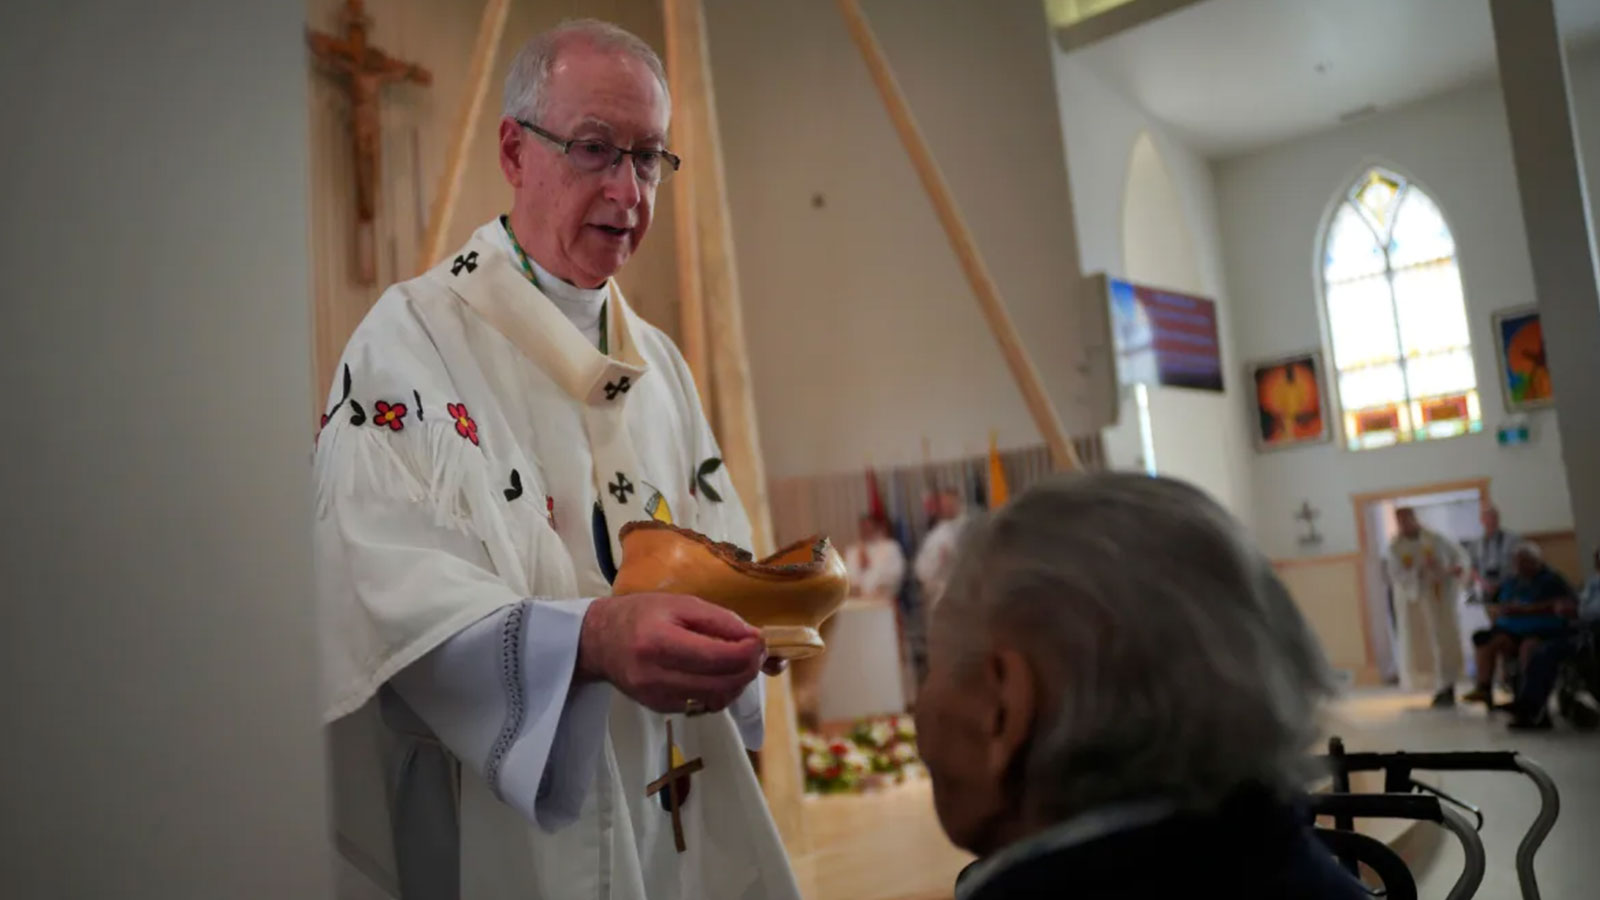 Edmonton Archbishop Richard Smith gives communion during the rededication ceremony and Sunday Mass at Sacred Heart Church of the First Peoples earlier this week. The Pope will be visiting Edmonton during his visit next week. 